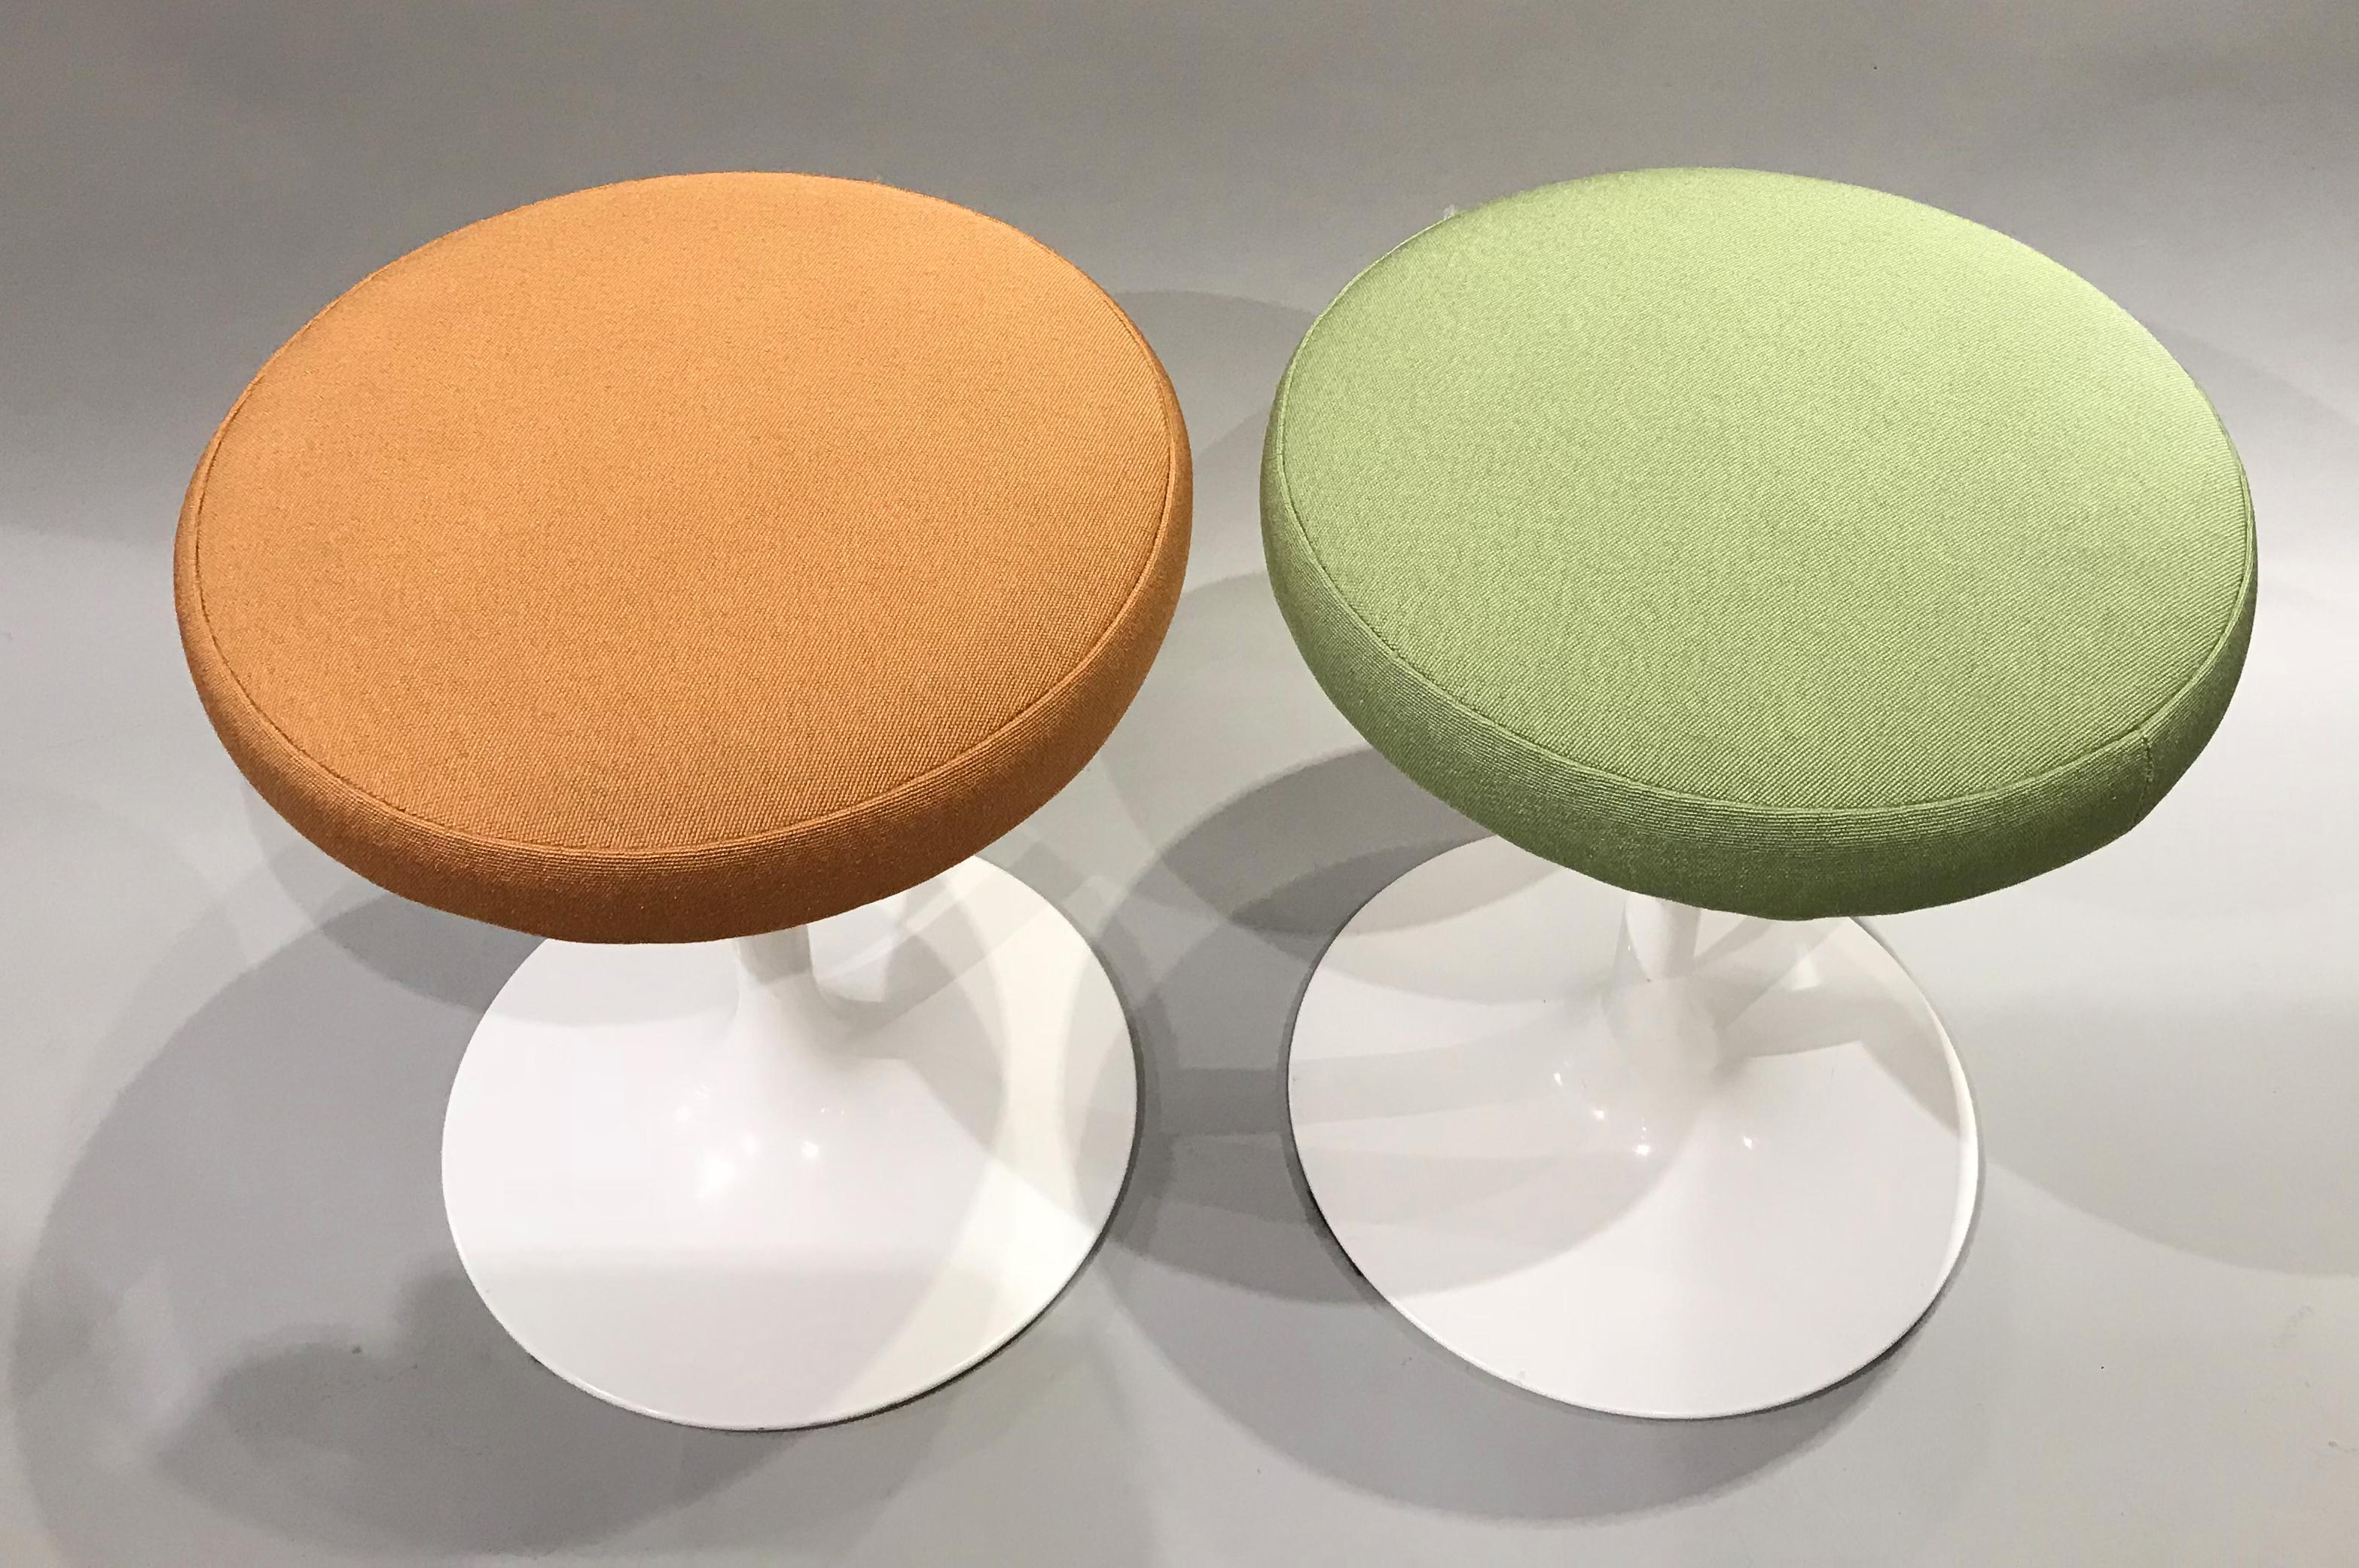 A fine pair of Knoll tulip stools with orange and green upholstered cushions and white painted aluminum base, originally designed by Eero Saarinen in the mid 20th century. This pair circa 2007 celebrates the 50th anniversary of this style with a